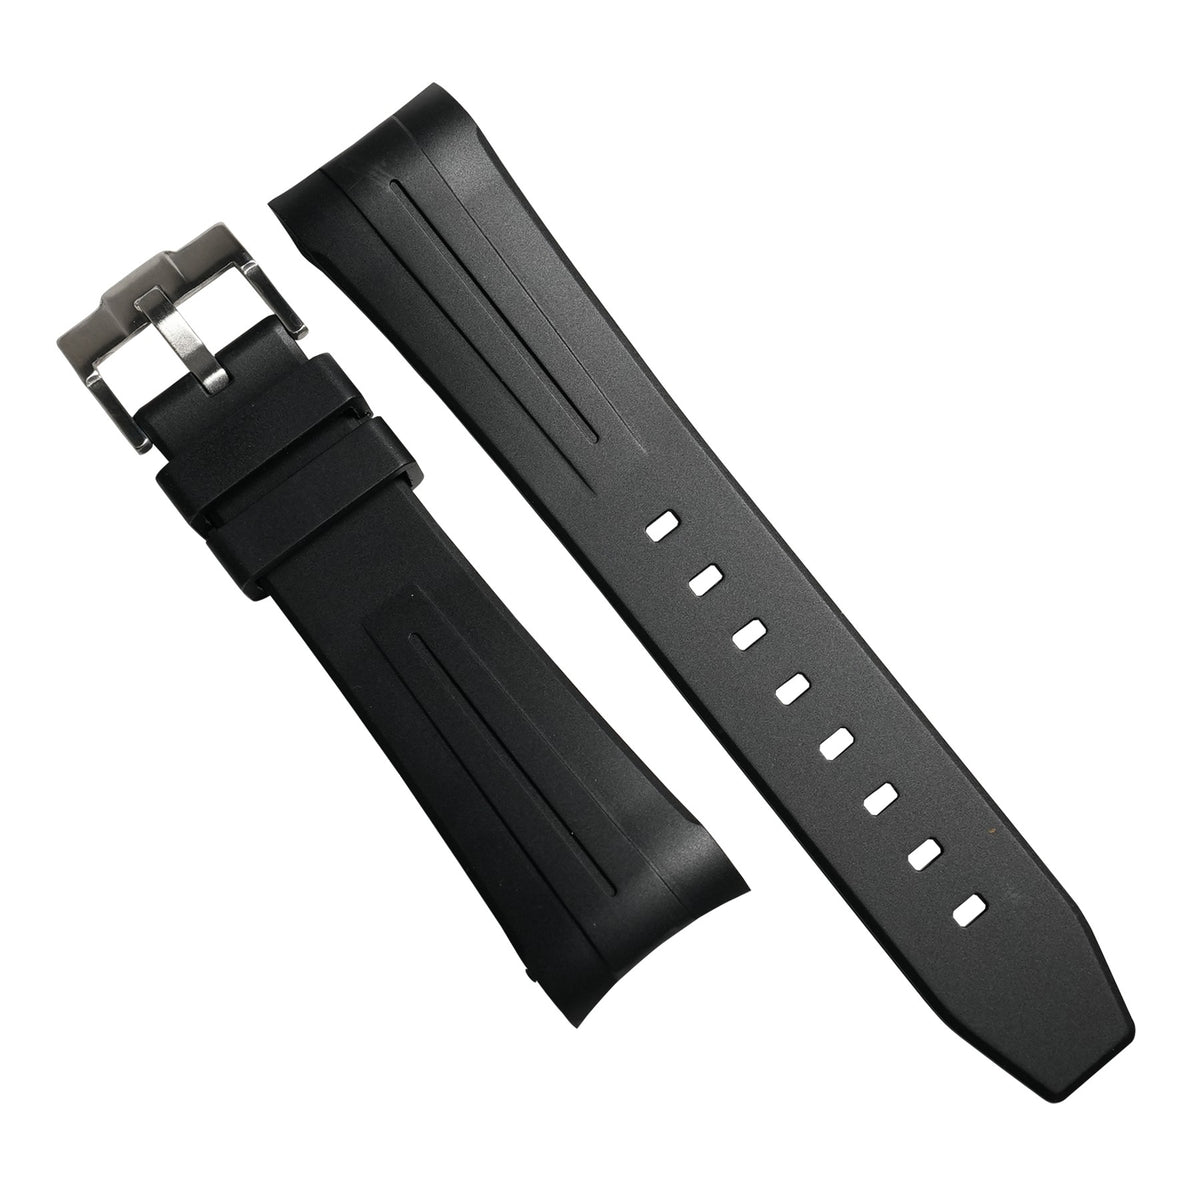 Curved End Rubber Strap for Blancpain x Swatch Scuba Fifty Fathoms in Black - Nomad Watch Works SG